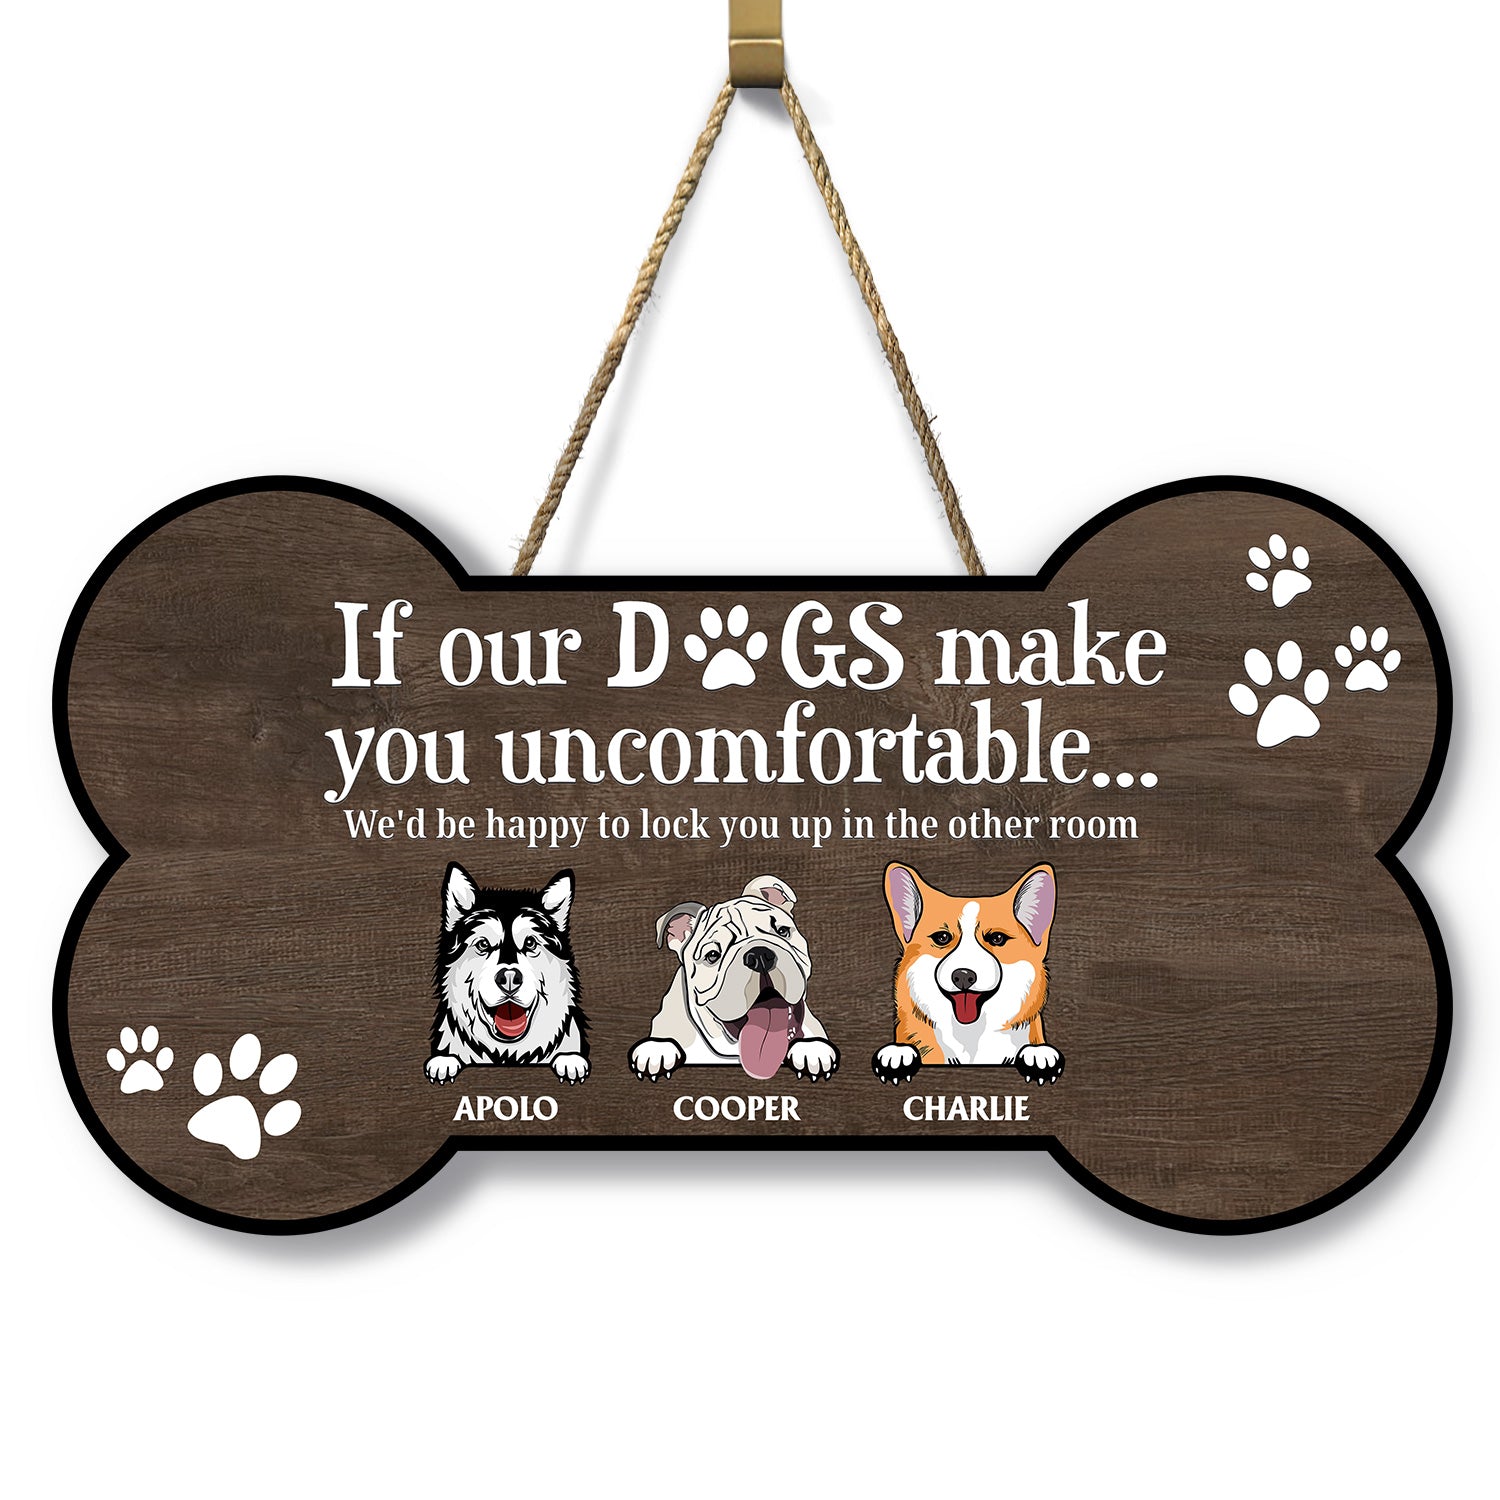 If Our Dogs Make You Uncomfortable - Funny, Decor Gift For Dog Lovers, Dog Moms, Dog Dads, Pet Lovers - Personalized Custom Shaped Wood Sign